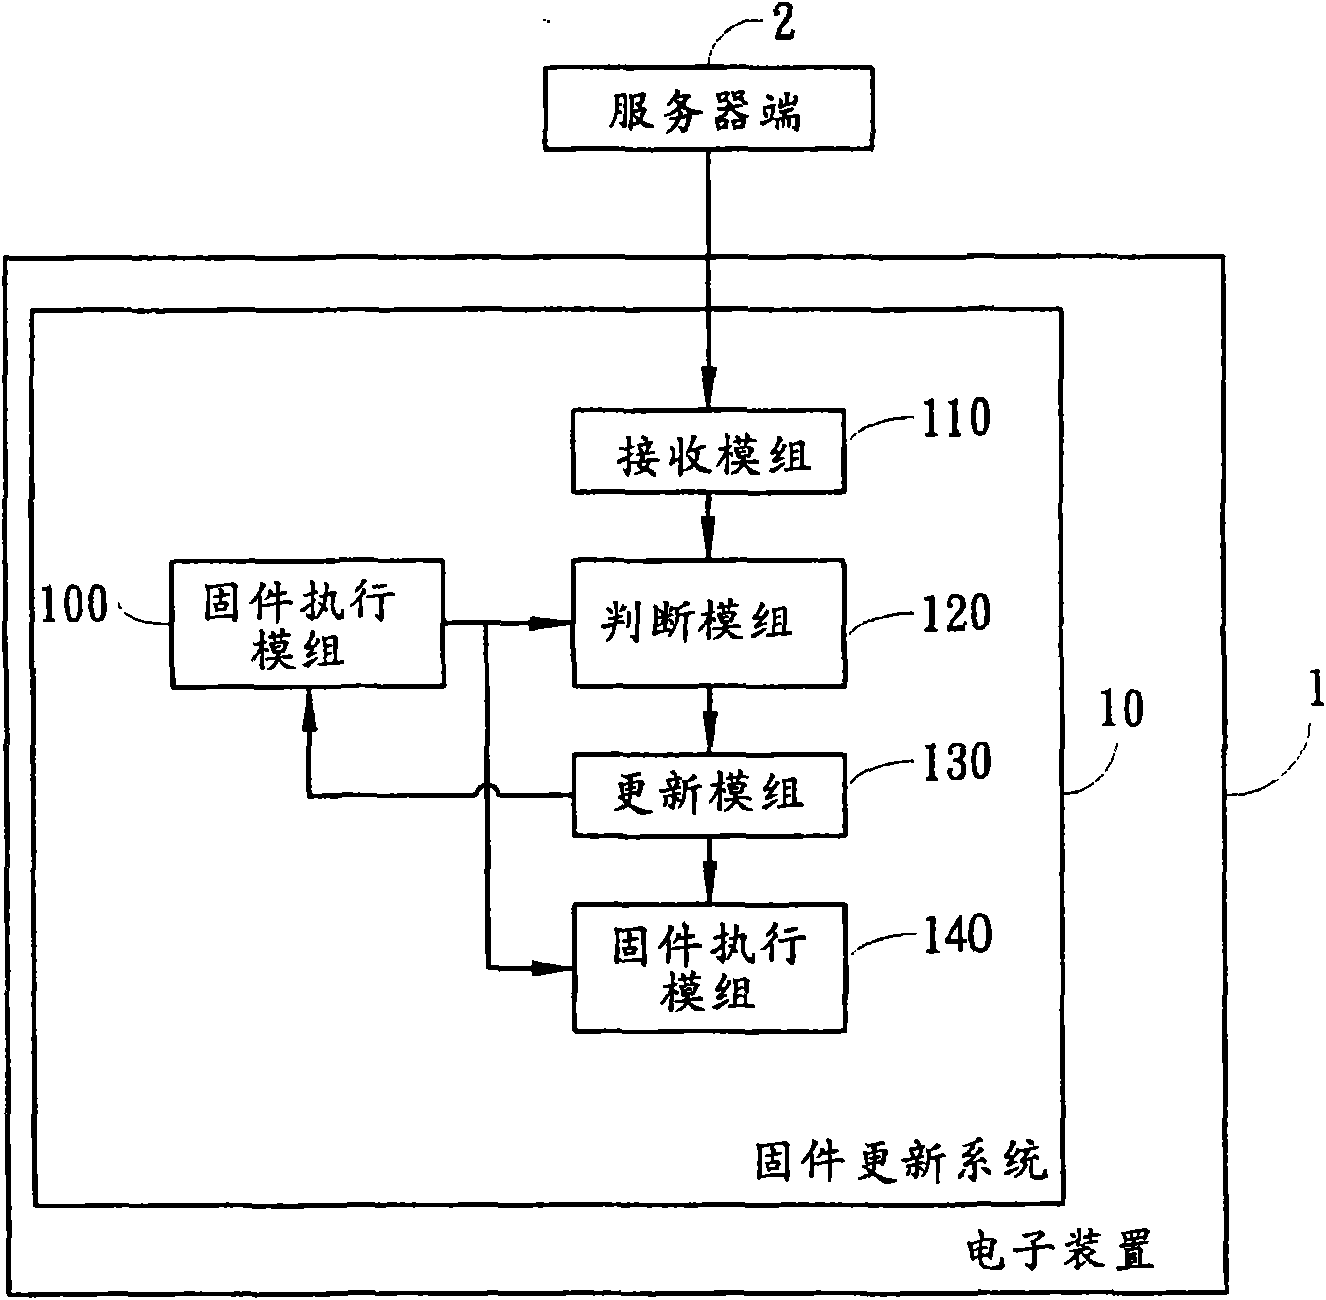 Firmware update system, method and building method of firmware of firmware update system